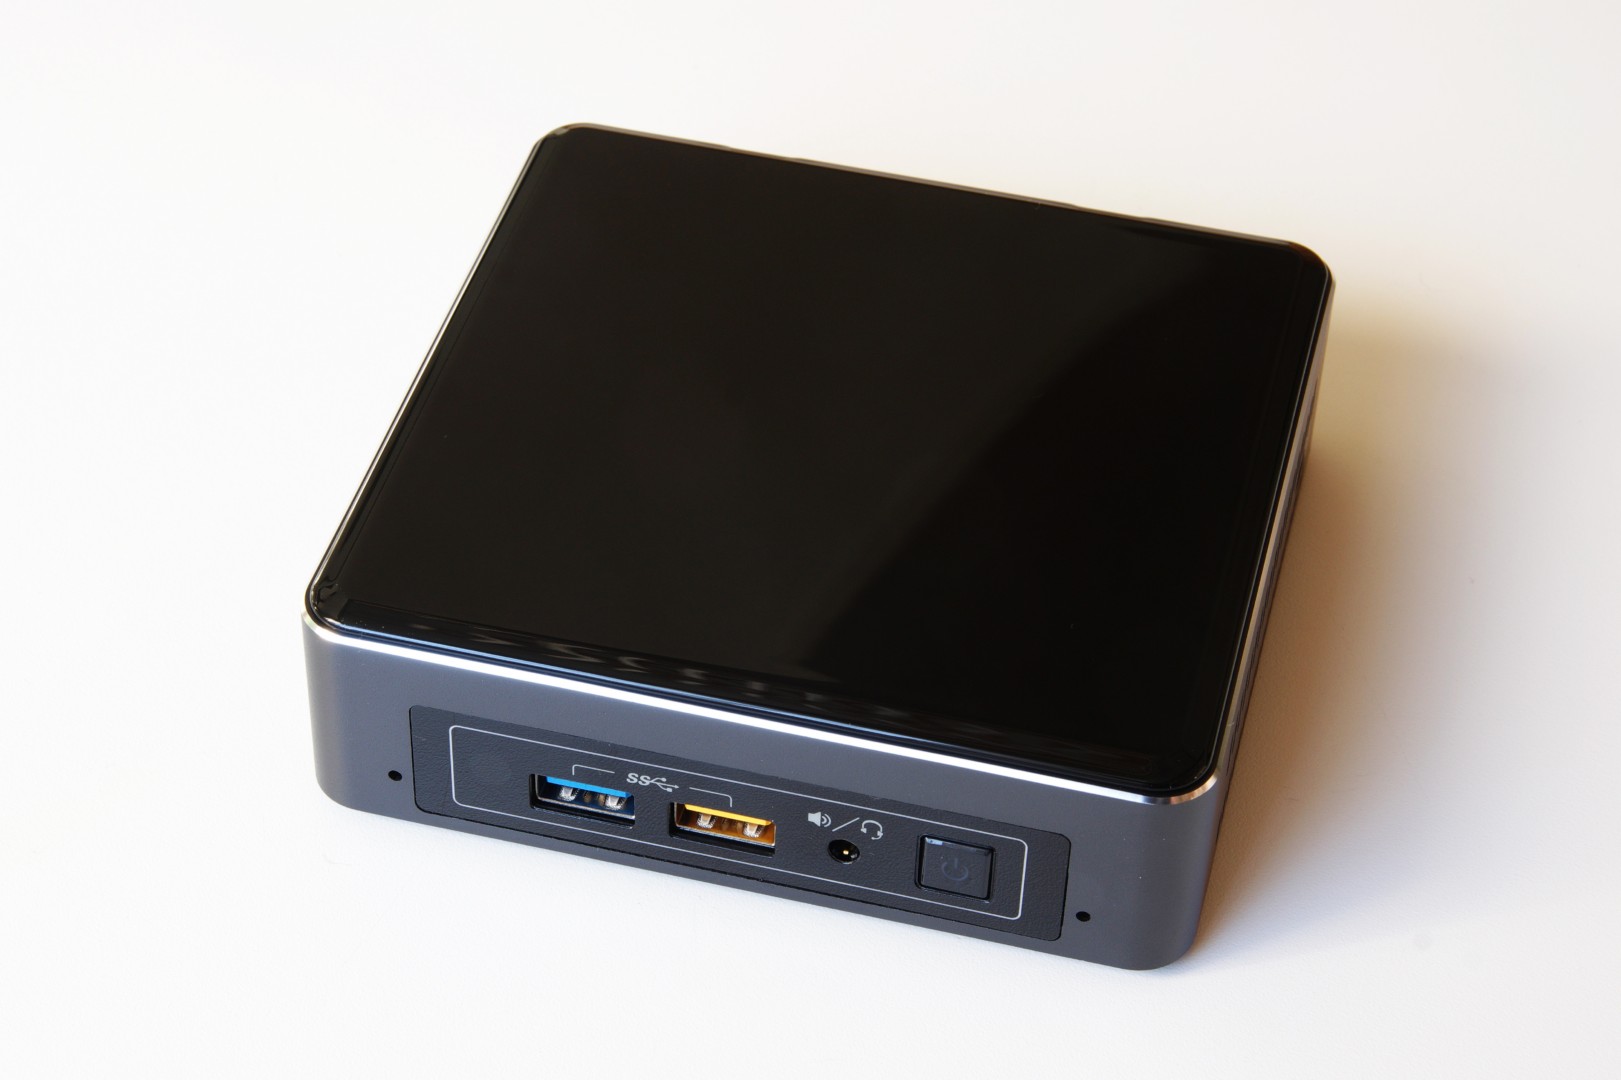 Kaby Lake i5 NUC Review 1/3: Overview (NUC7i5BNK) - The NUC Blog